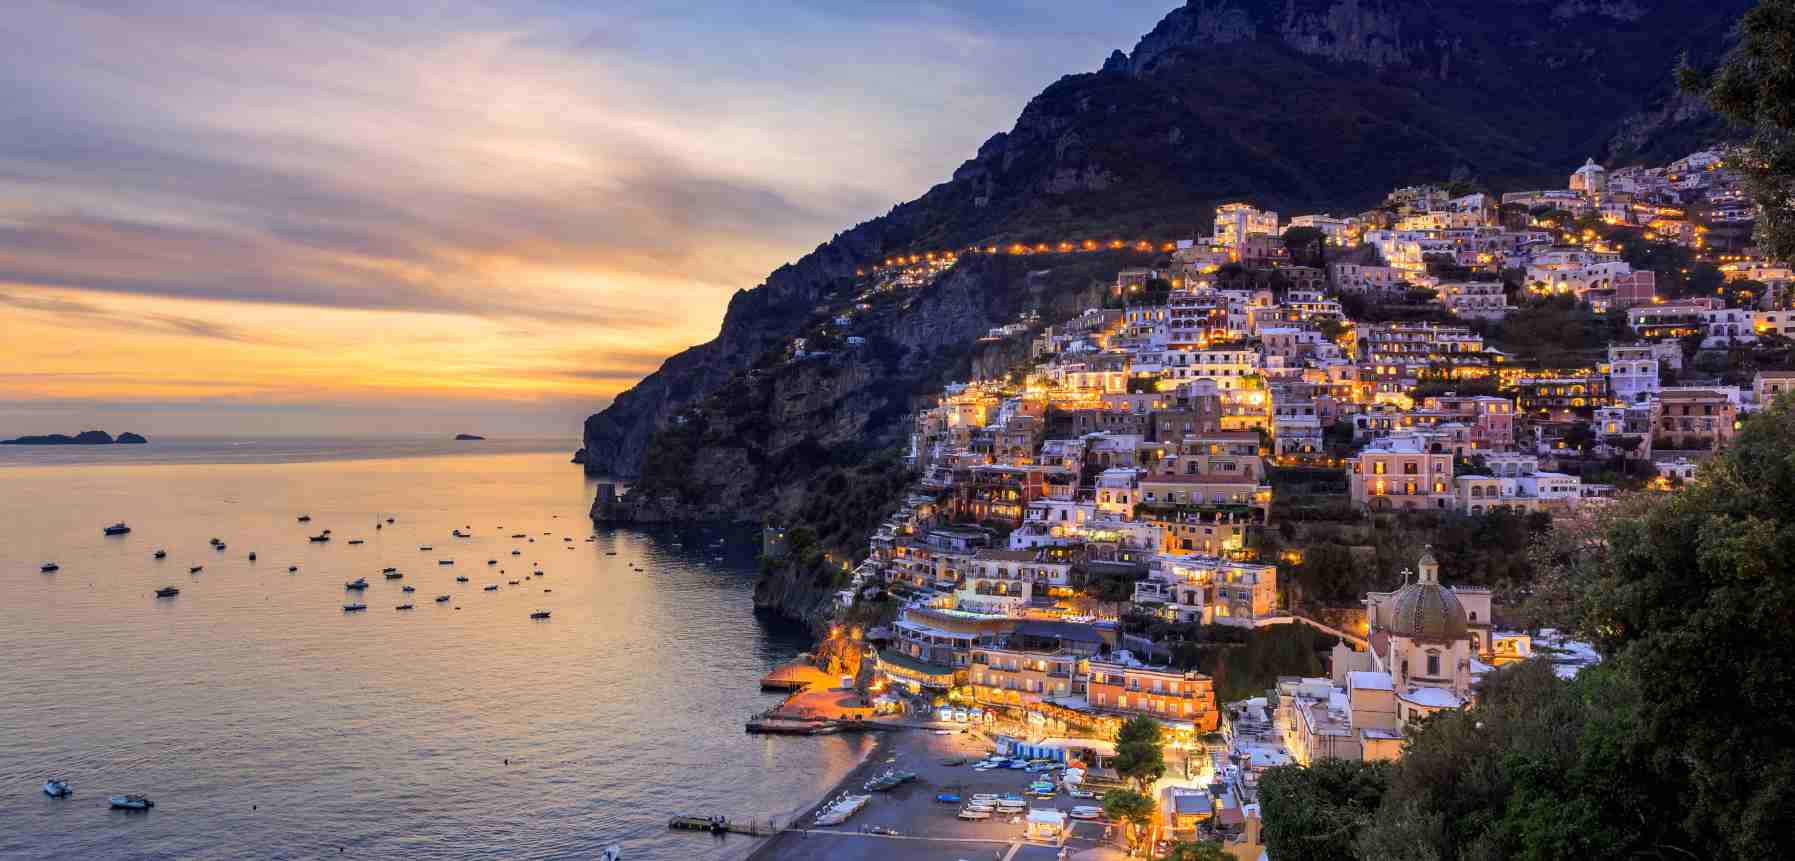 Stay on the Cliffside in Positano